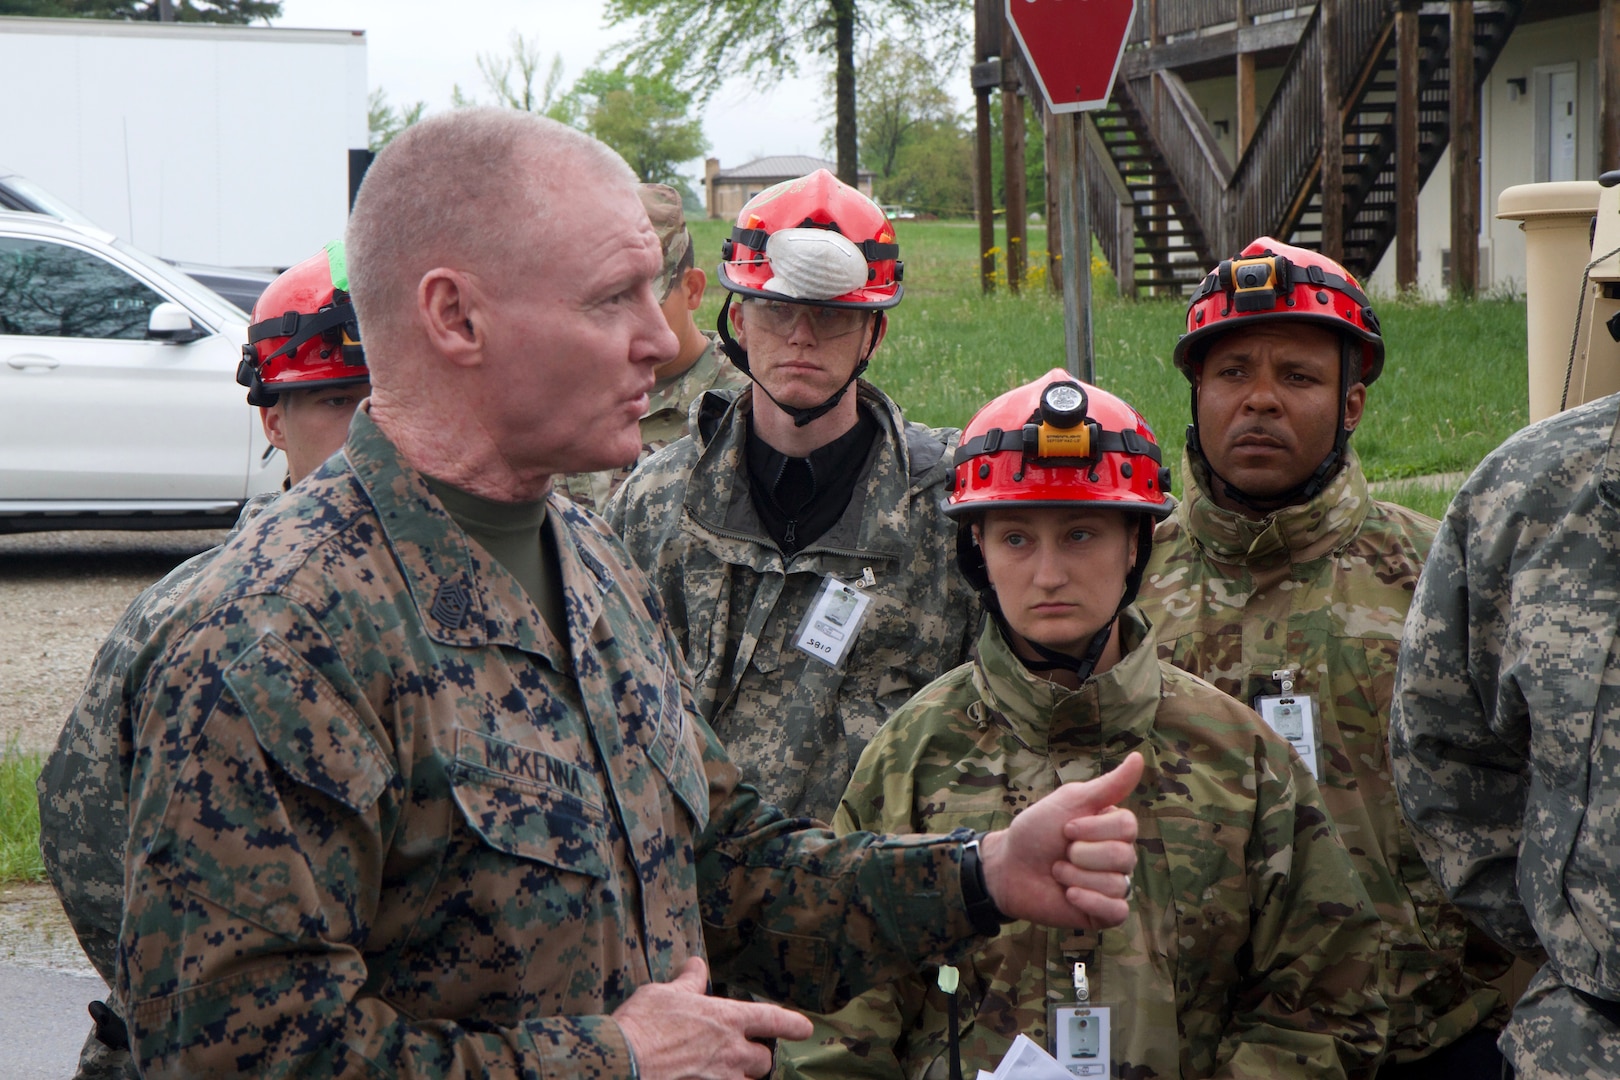 U.S. Marine Corps Sgt. Maj. Paul McKenna, Command Senior Enlisted Leader for North American Aerospace Defense Command and U.S. Northern Command, spoke with U.S. Army Soldiers from the 68th Engineer Company, 62nd Engineer Battalion, based in Ft. Hood, Texas, during Guardian Response 19, May 3, 2019.